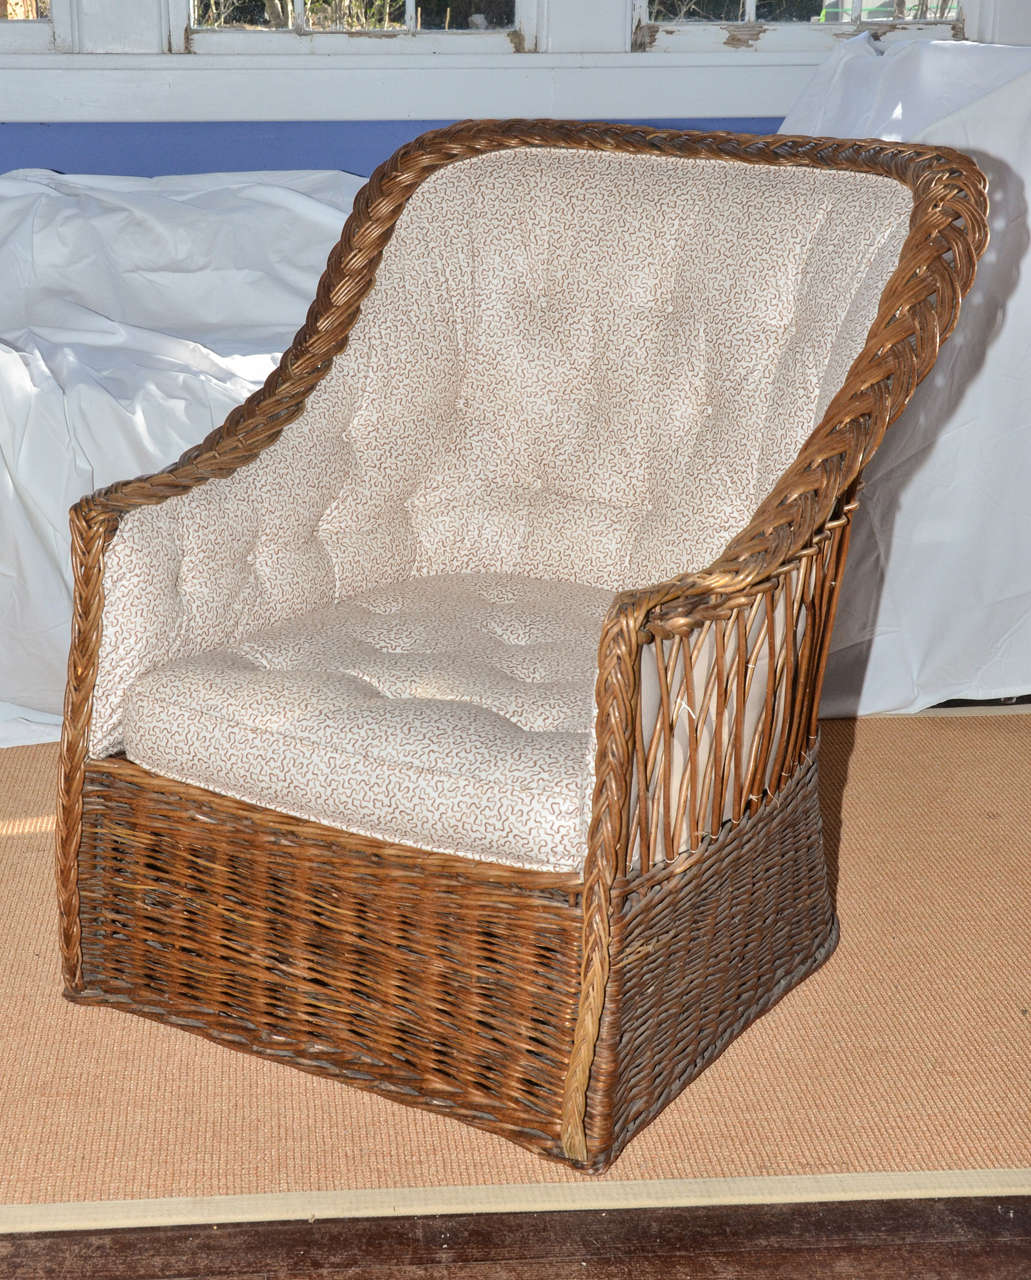 English natural wicker tufted back upholstered tub chair. The top of the arms have braided pattern; the back is backed with a lattice pattern. The tub shaped back has tufted upholstery in a brown and cream coral pattern, (same as Item #1405089201329